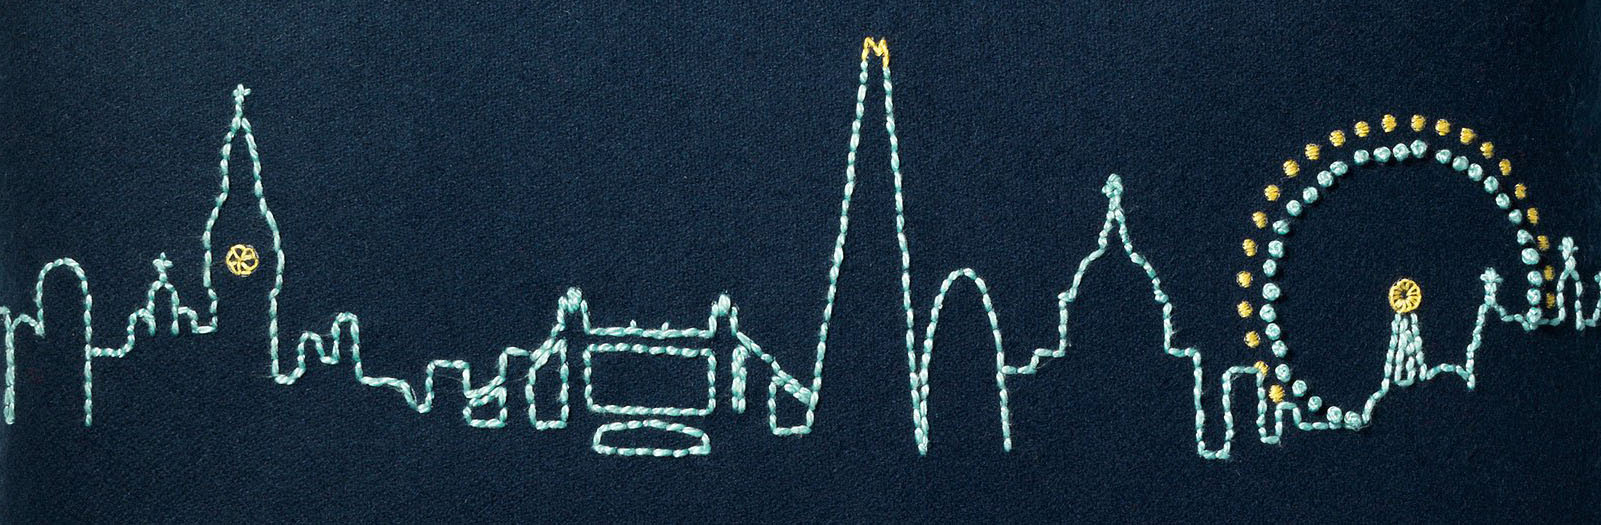 Fine Cell Work Unique Hand Embroidered Cushions Gifts Present London Skyline Landmarks Navy Blue